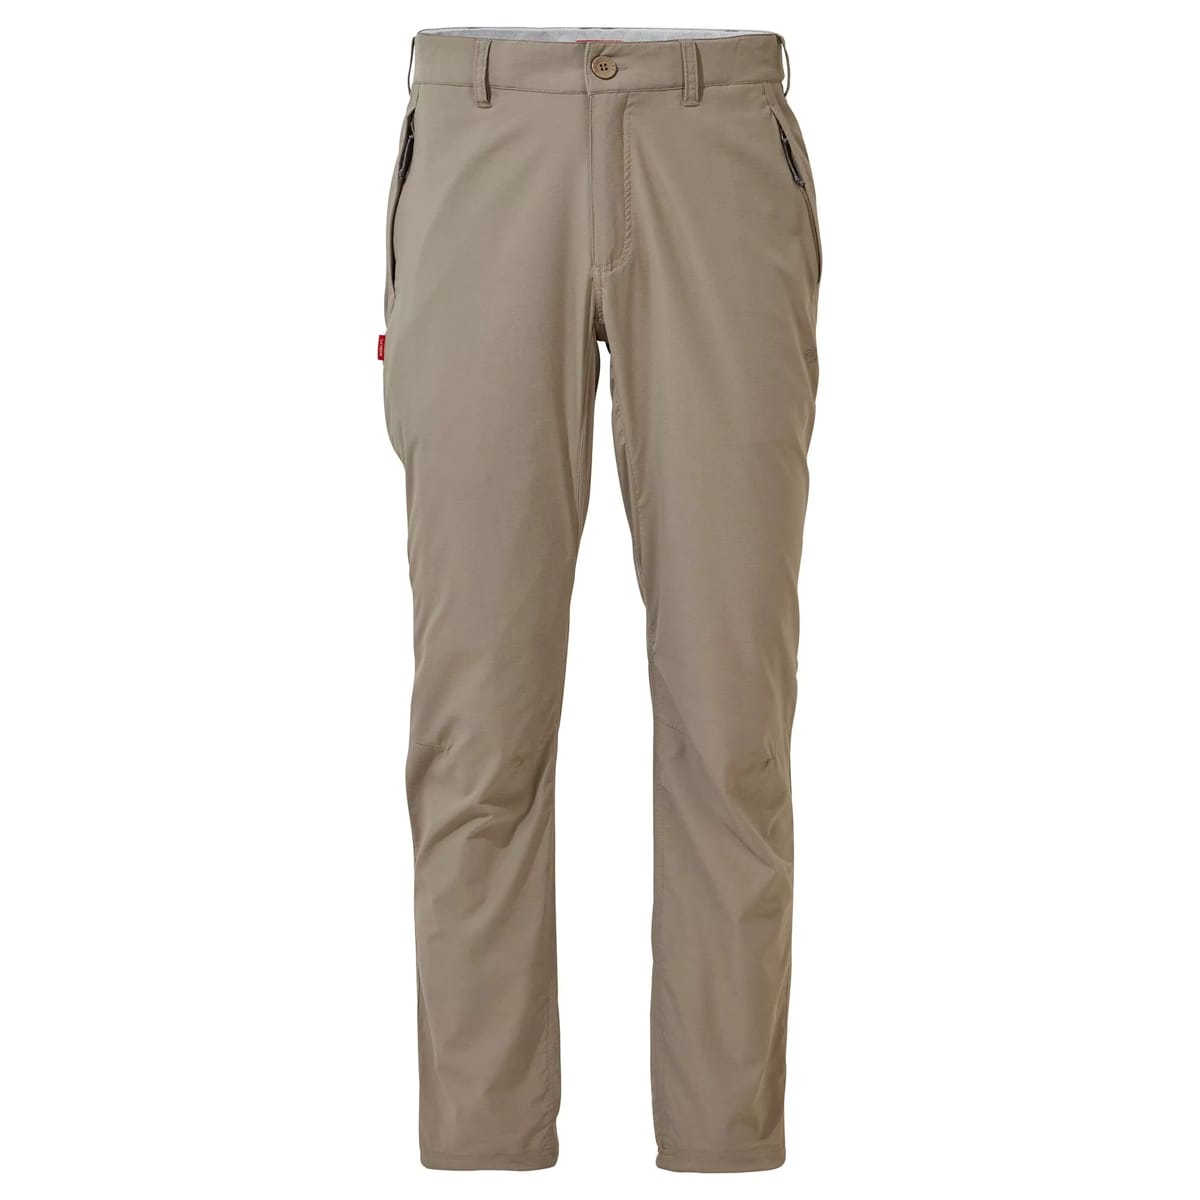 Craghoppers Nosilife Pro Trousers Pebble